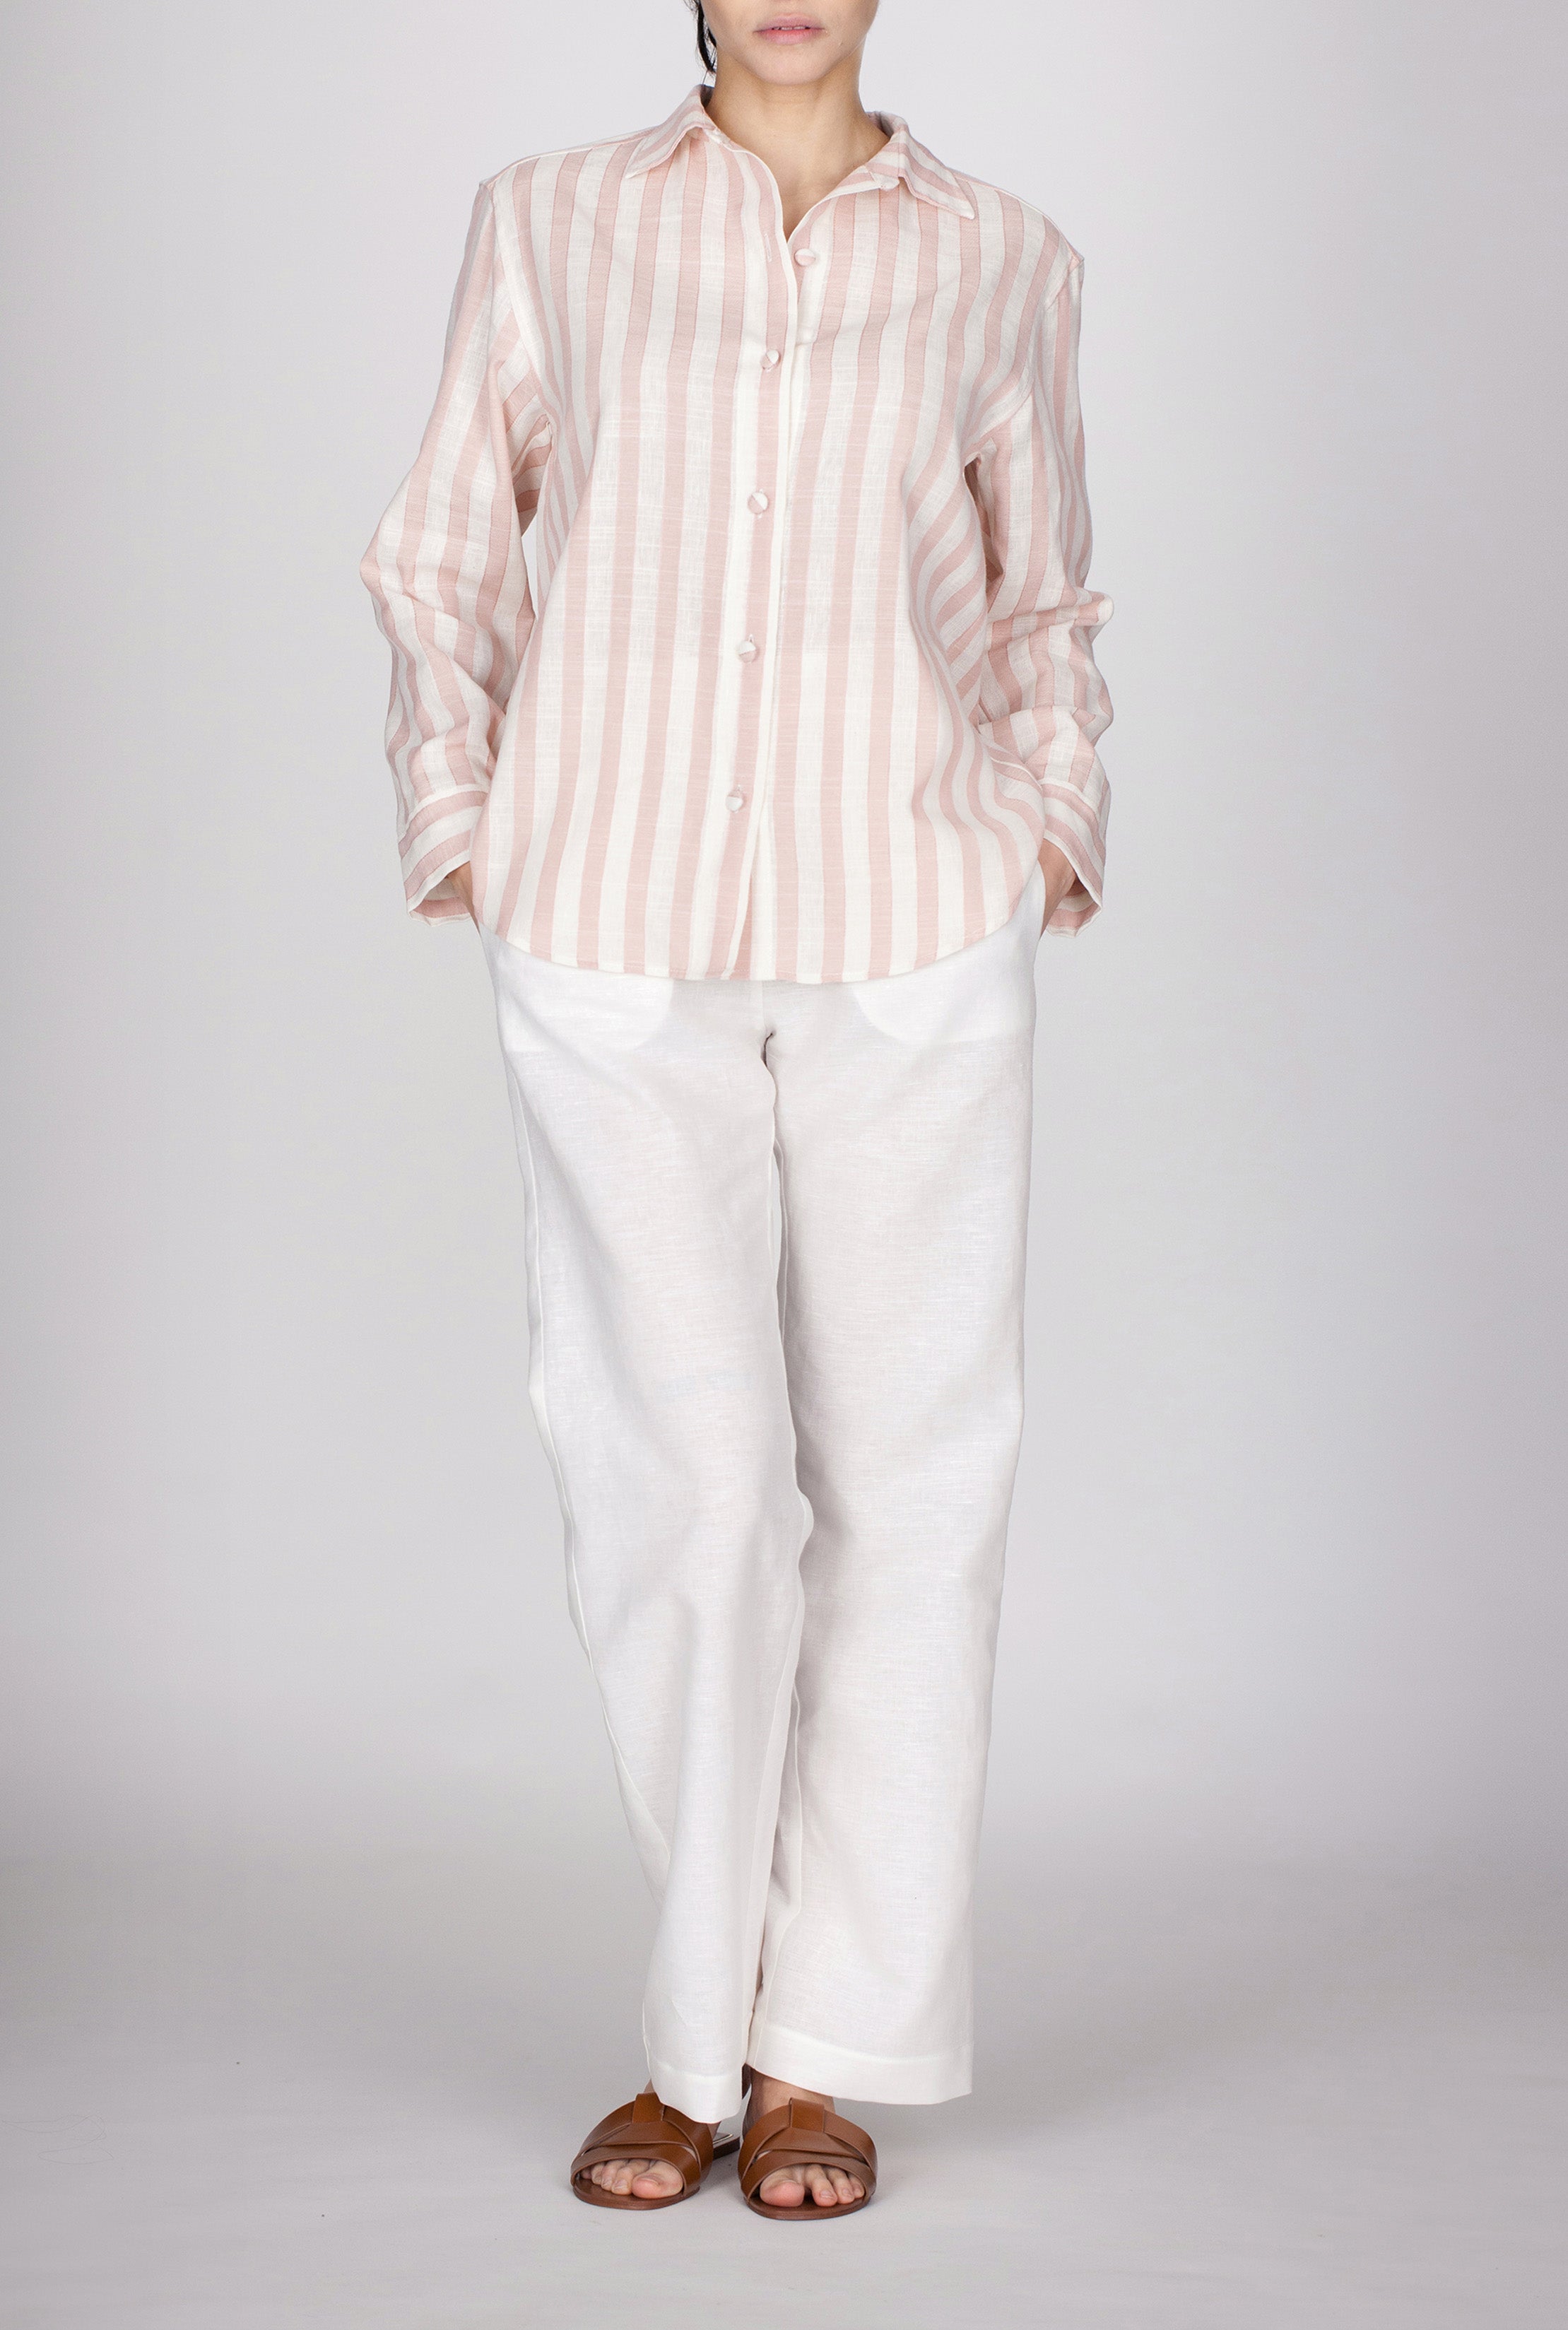 The Mary Shirt - Pink Stripes